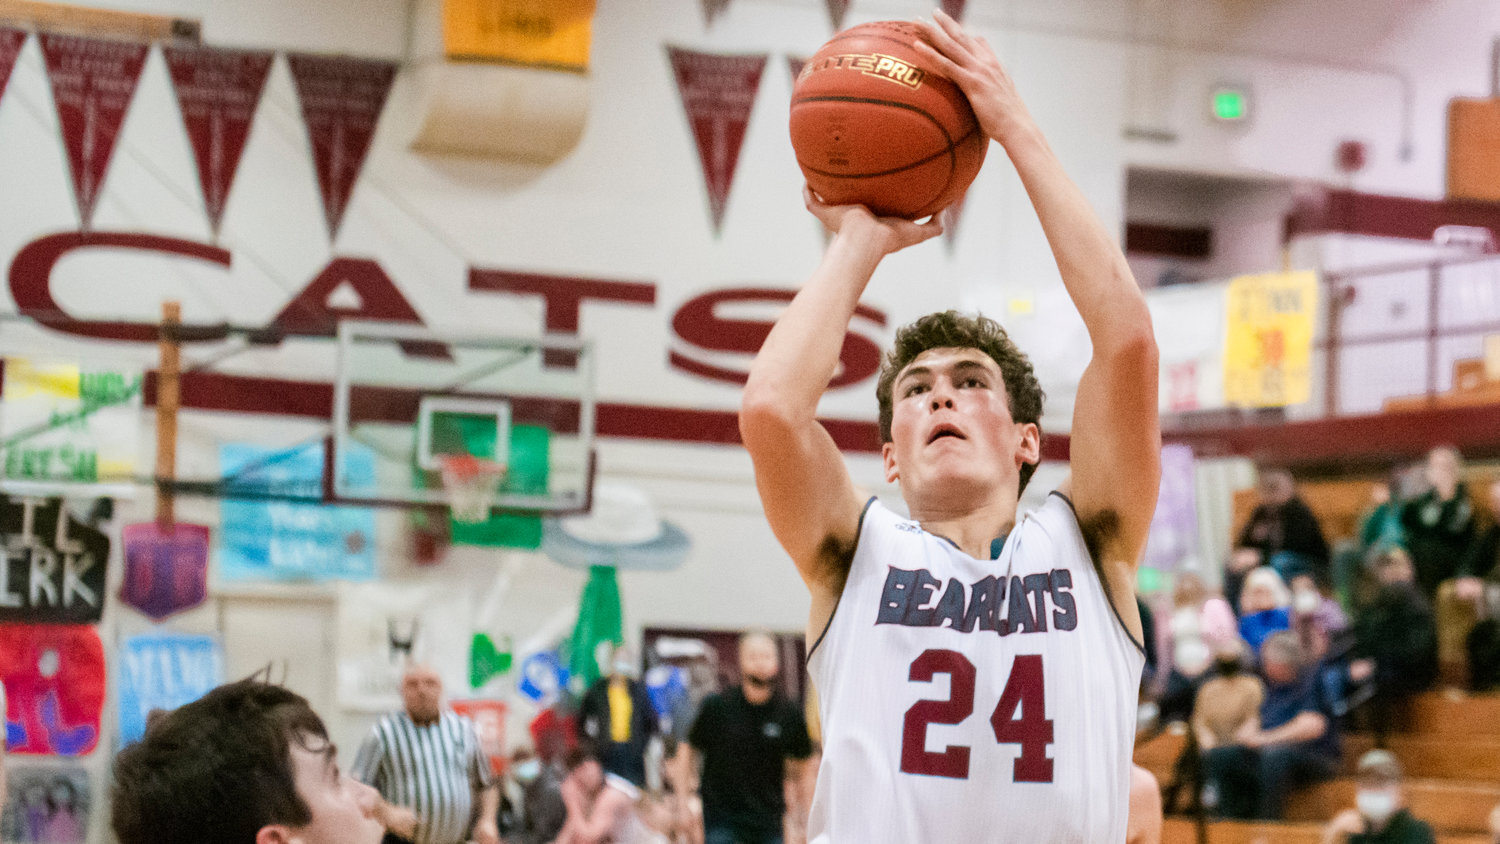 Bearcat Senior Gideon Priest looks to shoot Thursday night during a game at W.F. West in Chehalis.